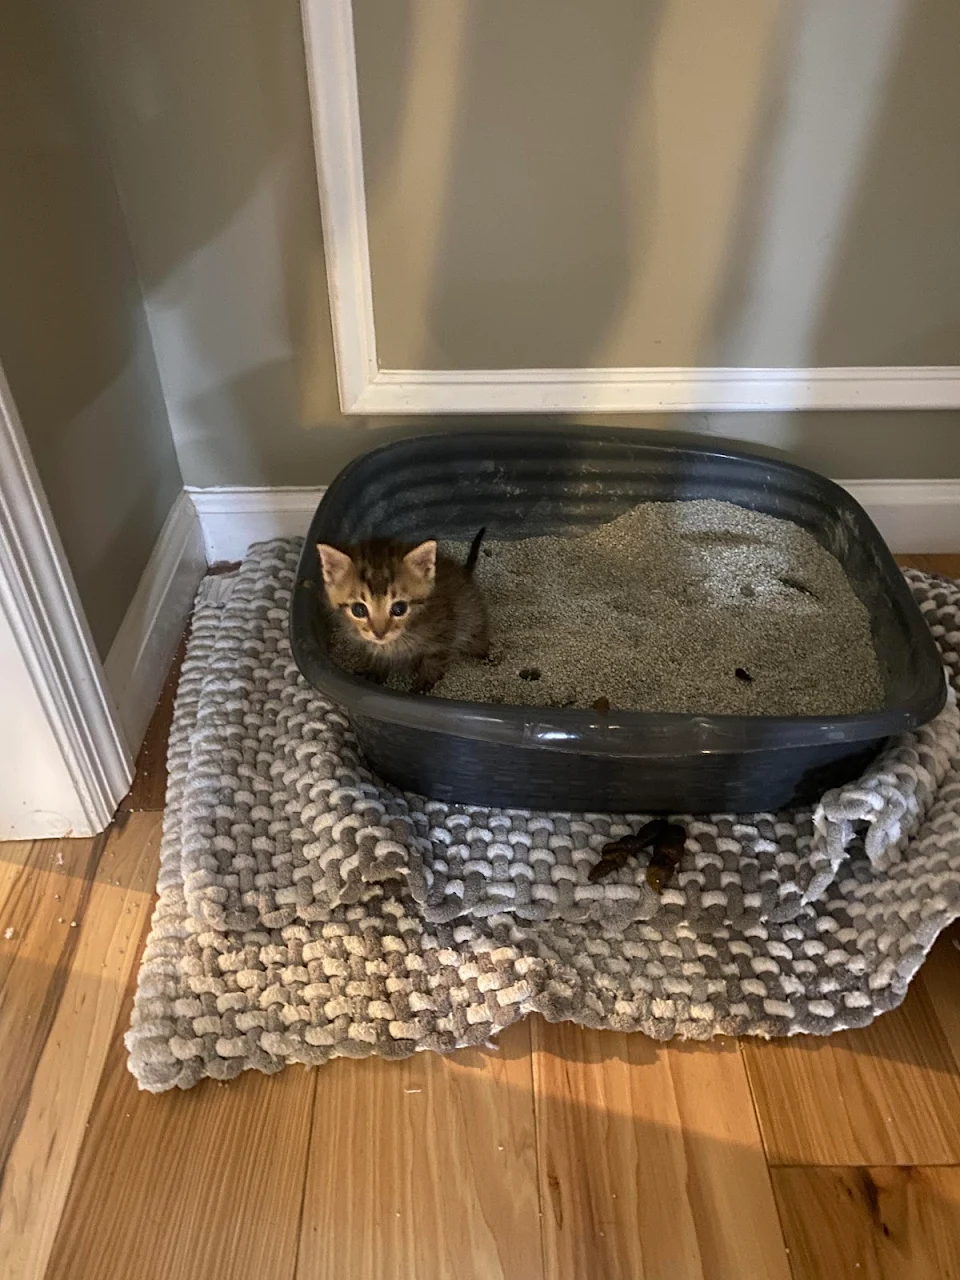 (oc) for anyone who saw my last post about my mom fostering a kitten, she did her first litter box pee 😺😺 ft our older cats poop outside the litter box 😐